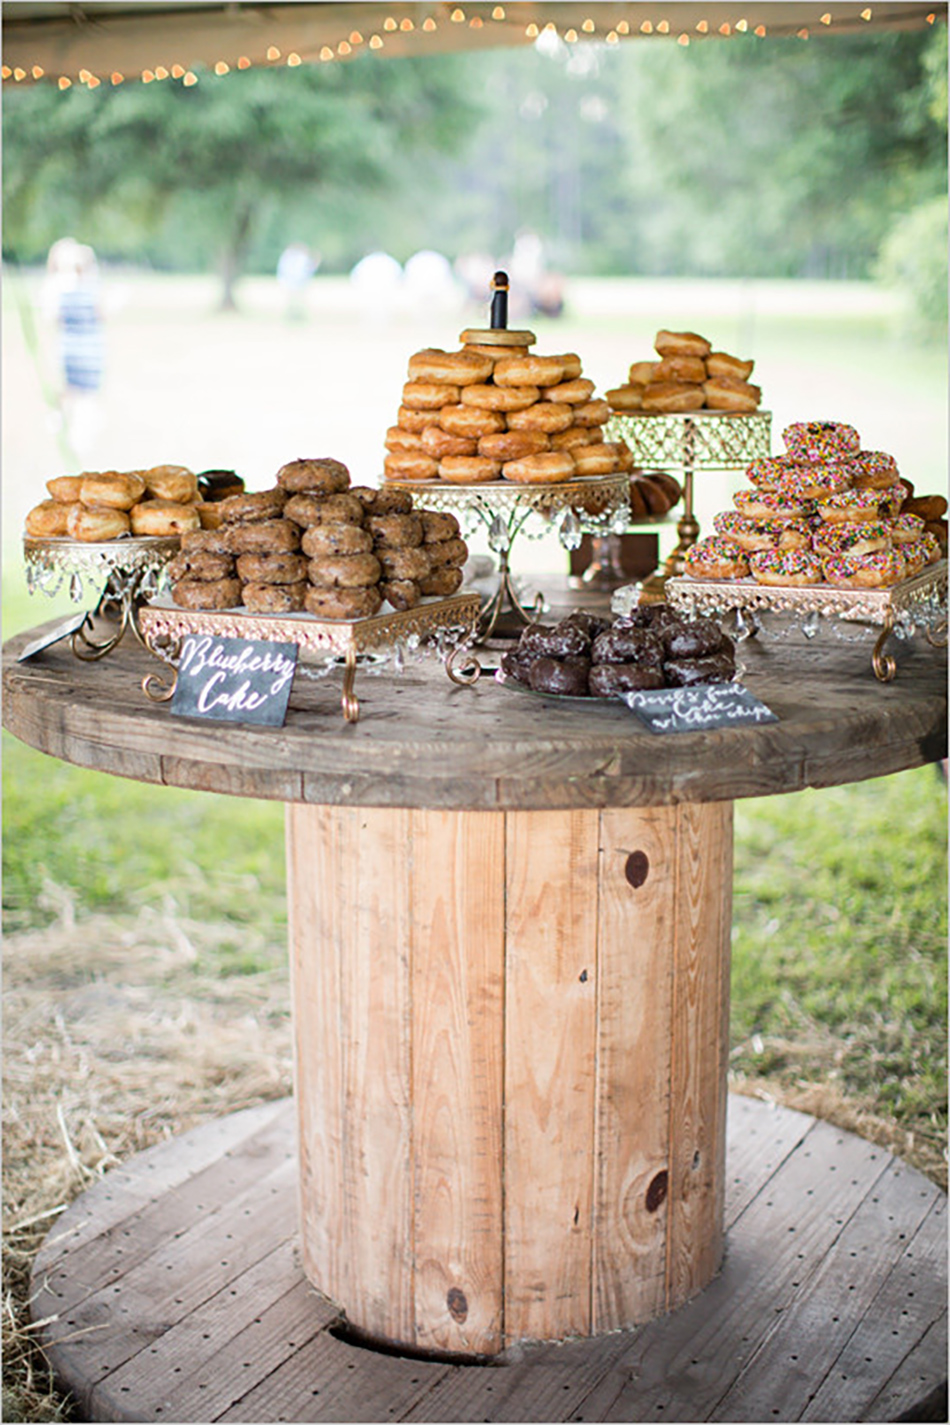 Bling up your barn wedding venue with Crystal Wedding Cake Stands